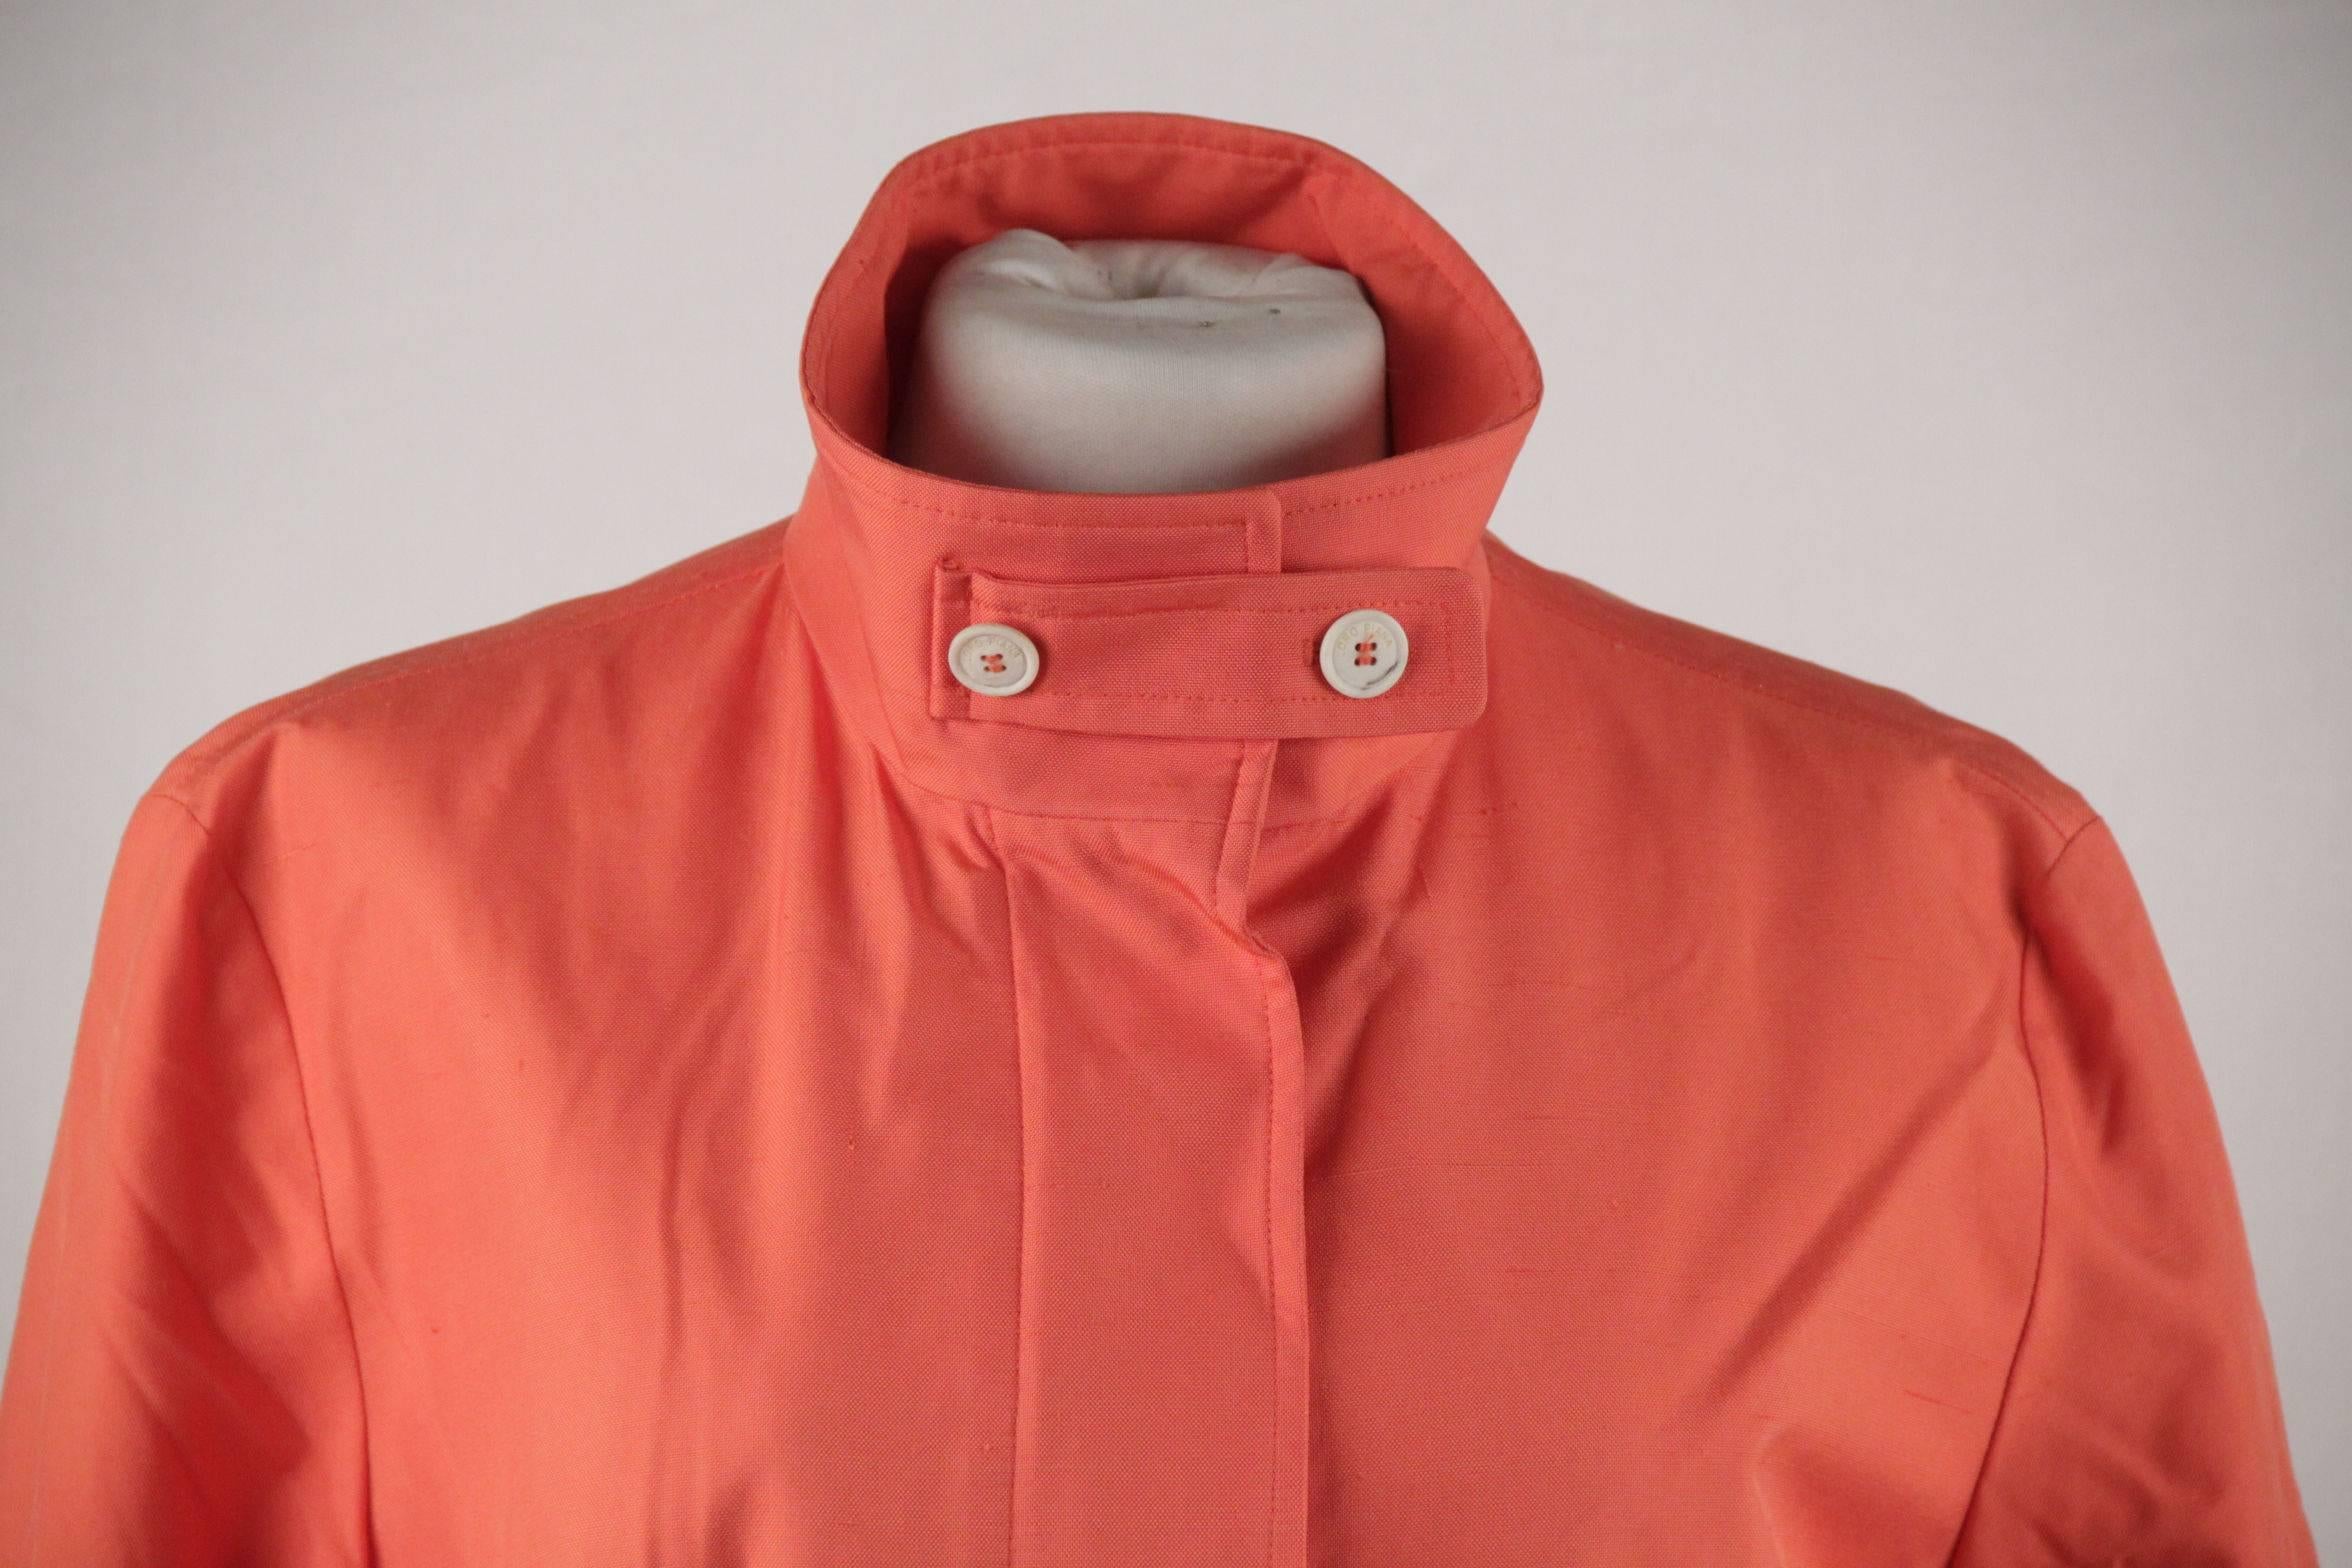  Brand: LORO PIANA - made in Italy

Logos / Tags: 'LORO PIANA Rain & Storm System - Rain & Wind Protection - made in Italy' tag, size tag (42 IT), composition tag, signed hardware

Condition rate & details (please read our condition chart